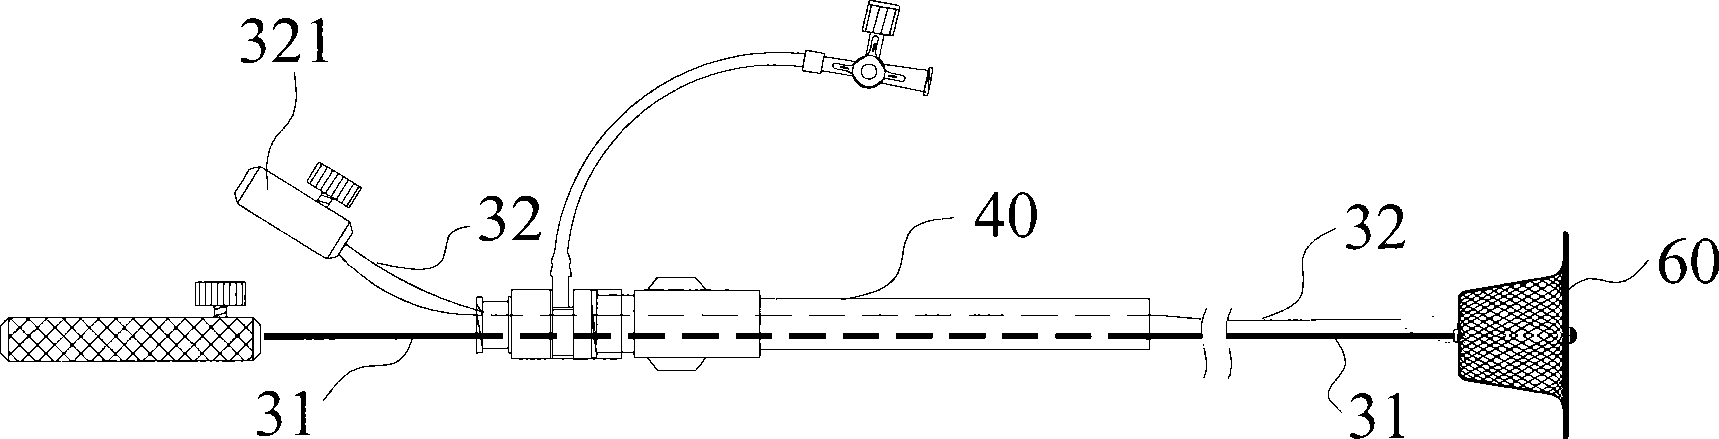 Flexible releasing conveying system